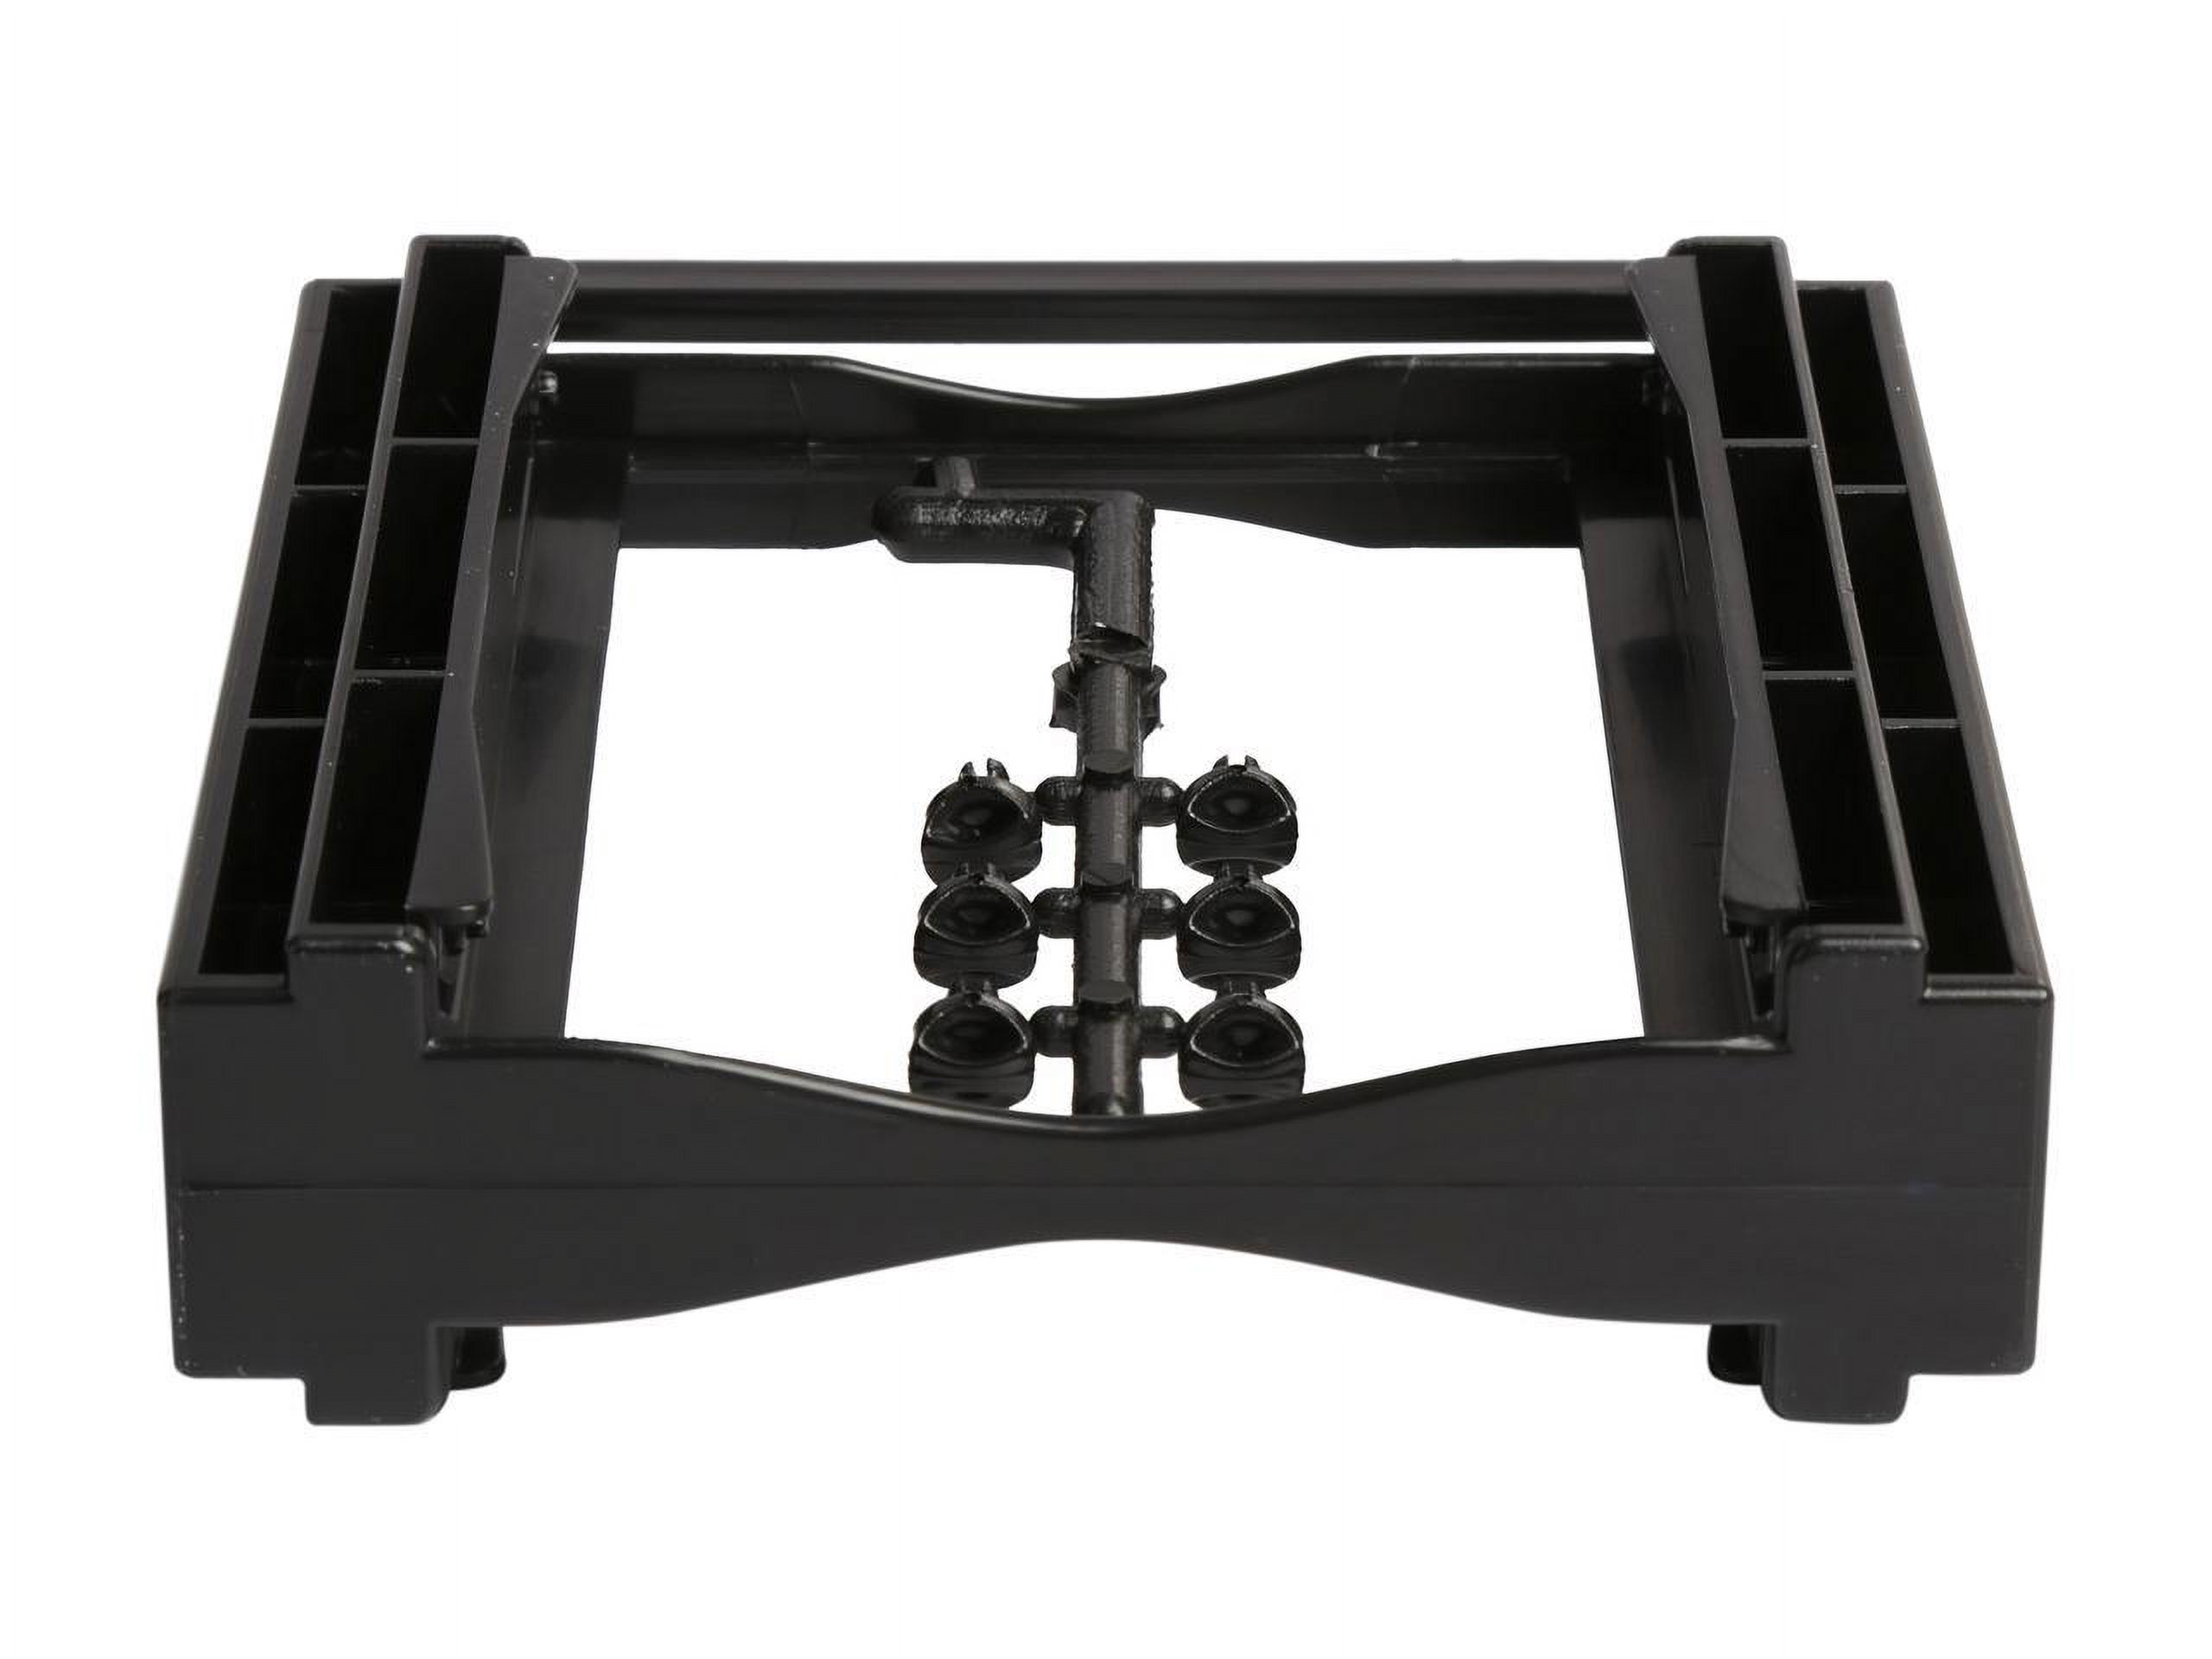 BRACKET225PT Dual 2.5in SSD/HDD Mounting Bracket for 3.5in Drive Bay - image 2 of 7